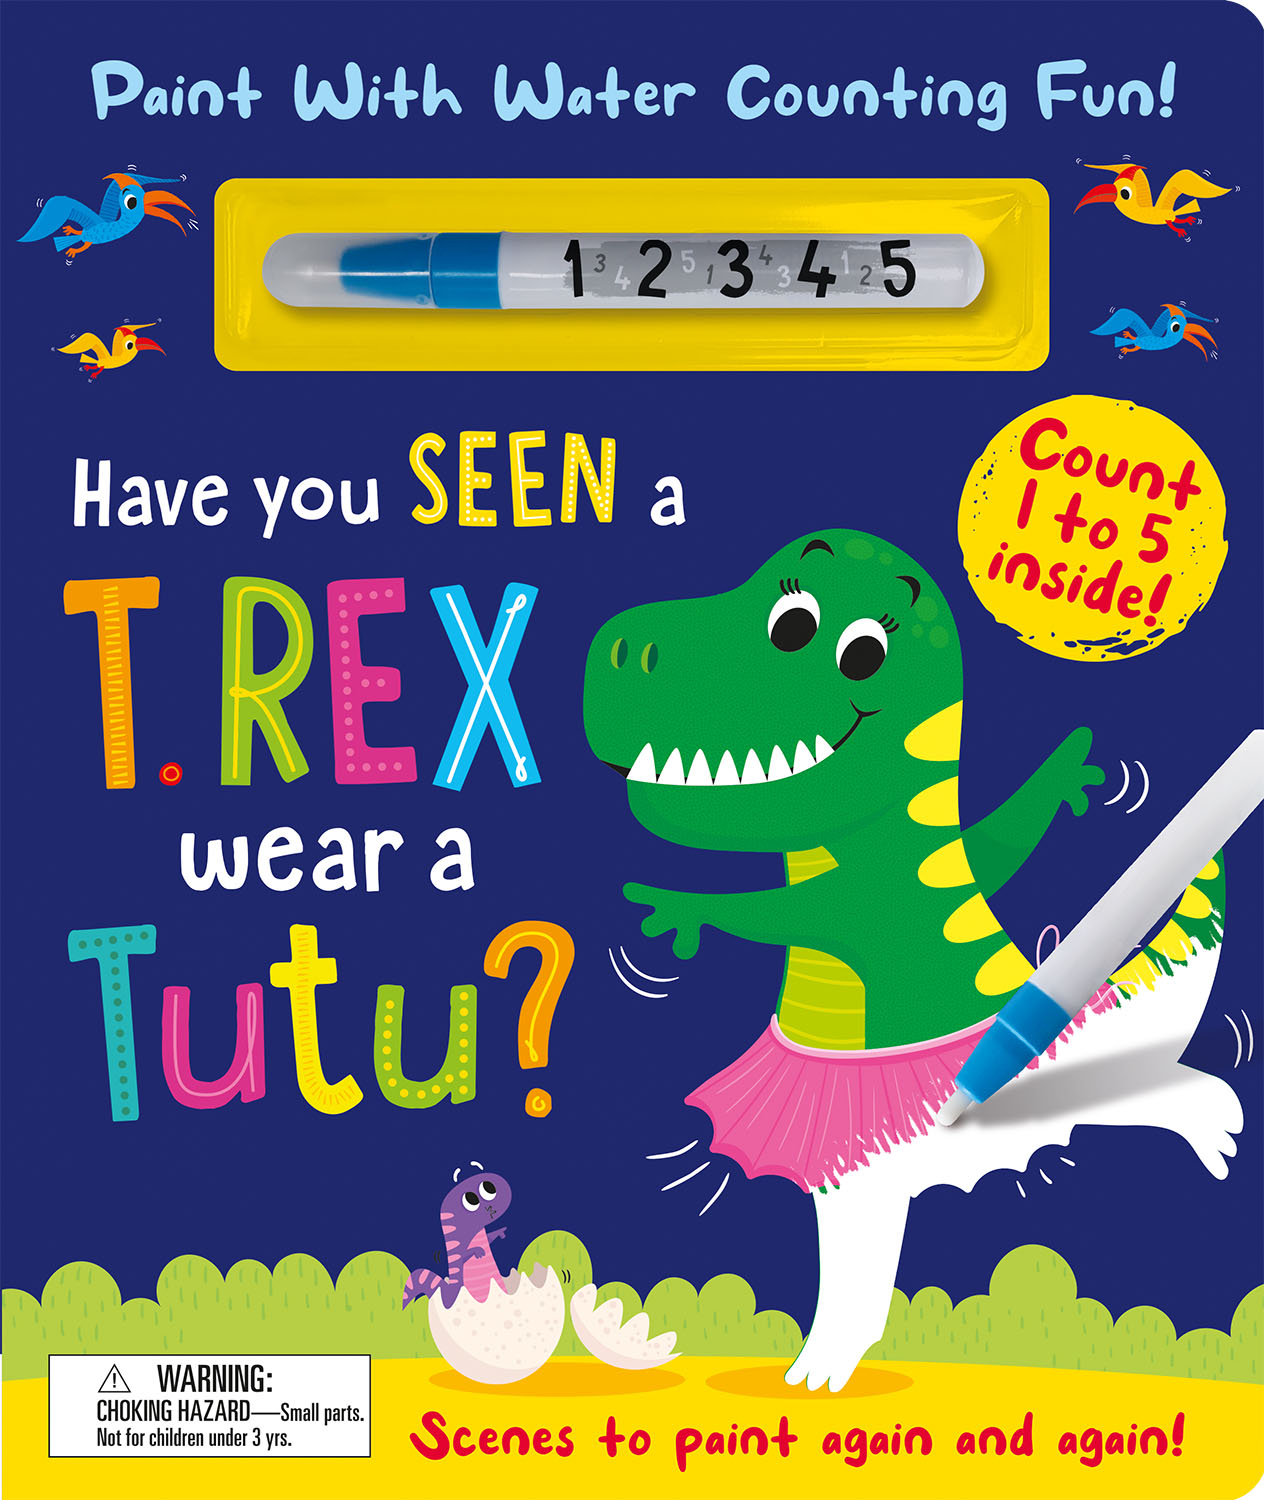 HAVE YOU SEEN A T. REX WEAR A TUTU? - PAINT WITH WATER COUNTING FUN!